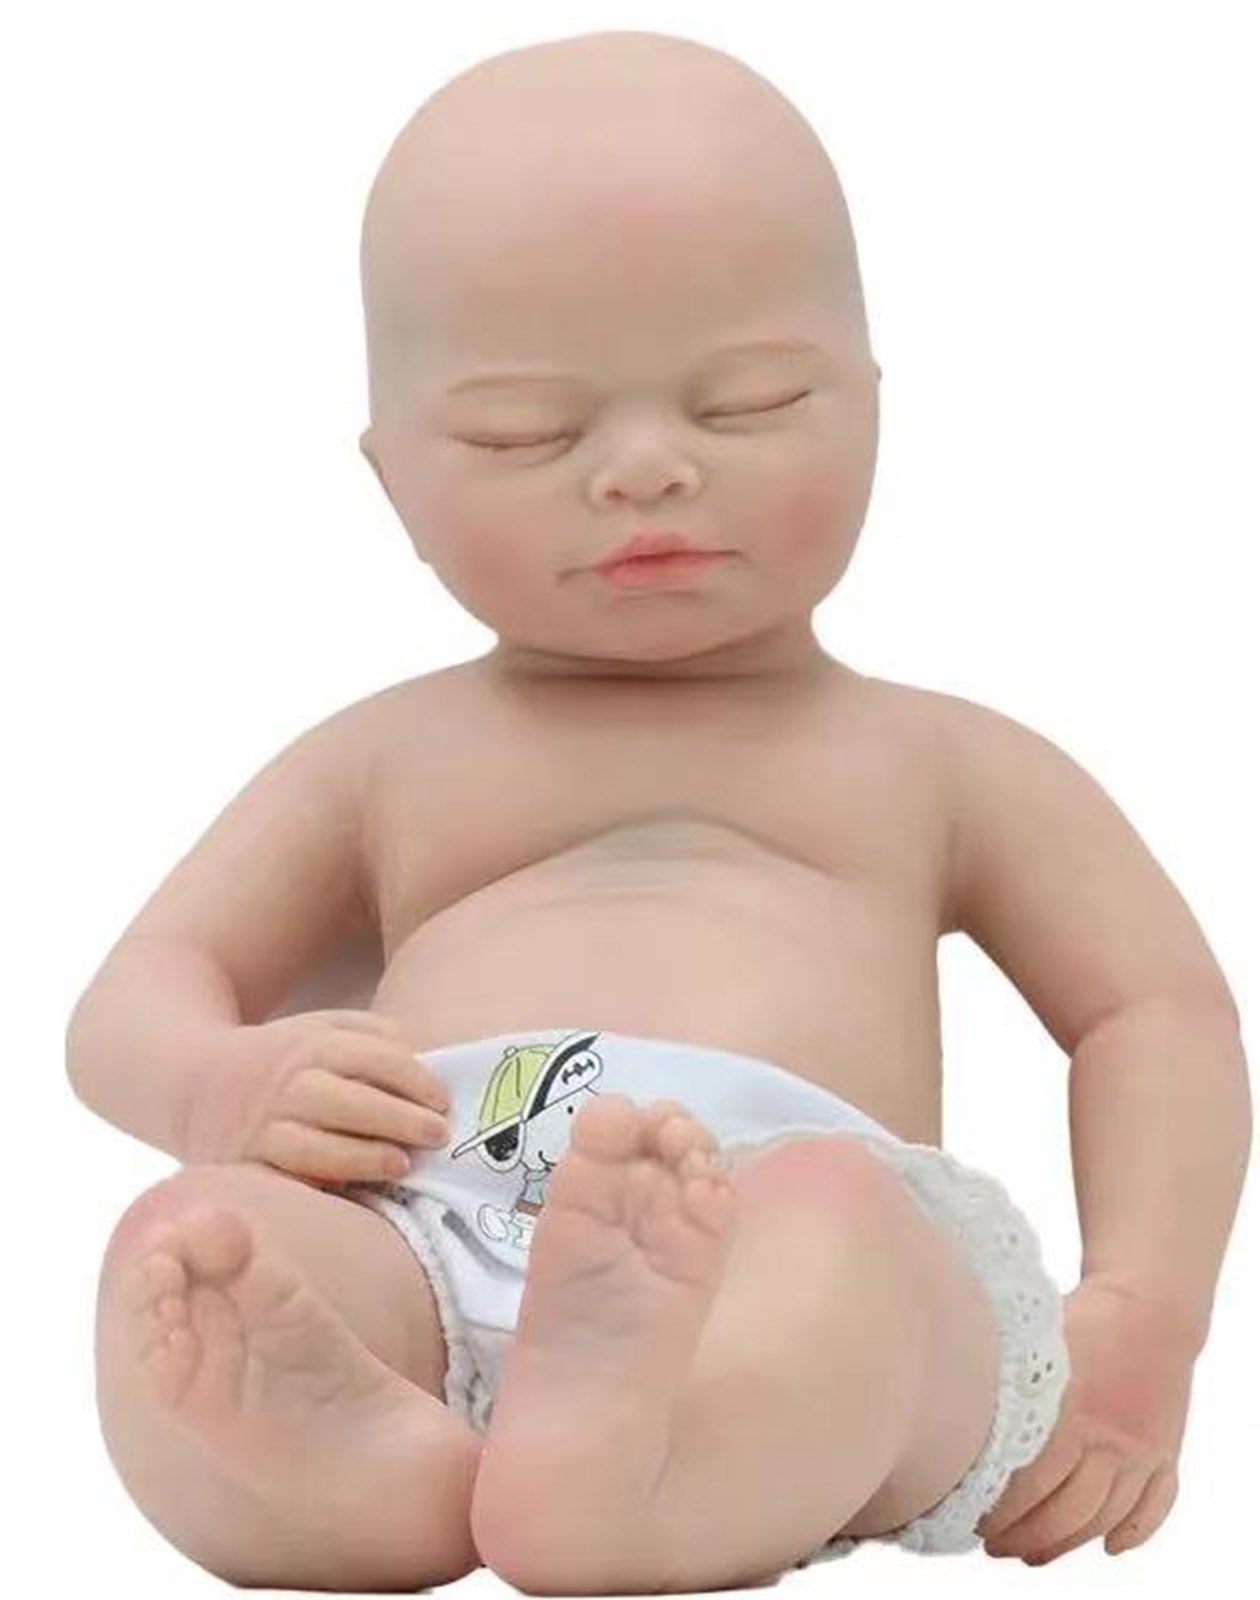 Hiram - 20" Full Silicone Reborn Baby Dolls Platinum Silicone Real Toddlers Boy with Sleeping Face